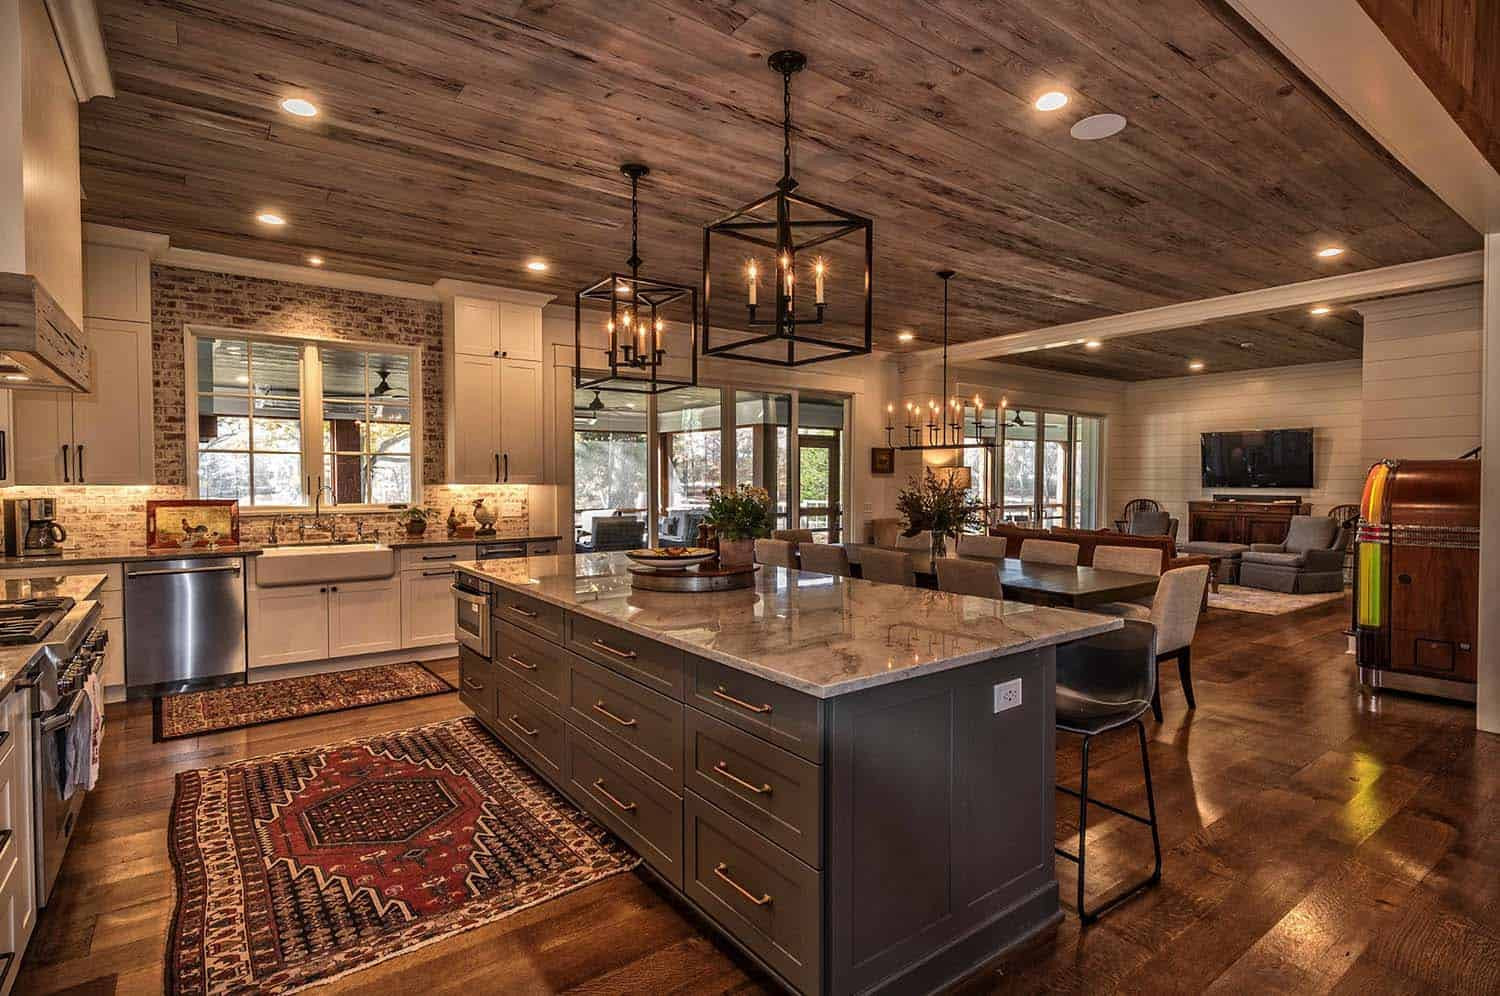 Rustic Kitchen Designs Photo Gallery
 40 Unbelievable Rustic Kitchen Design Ideas To Steal